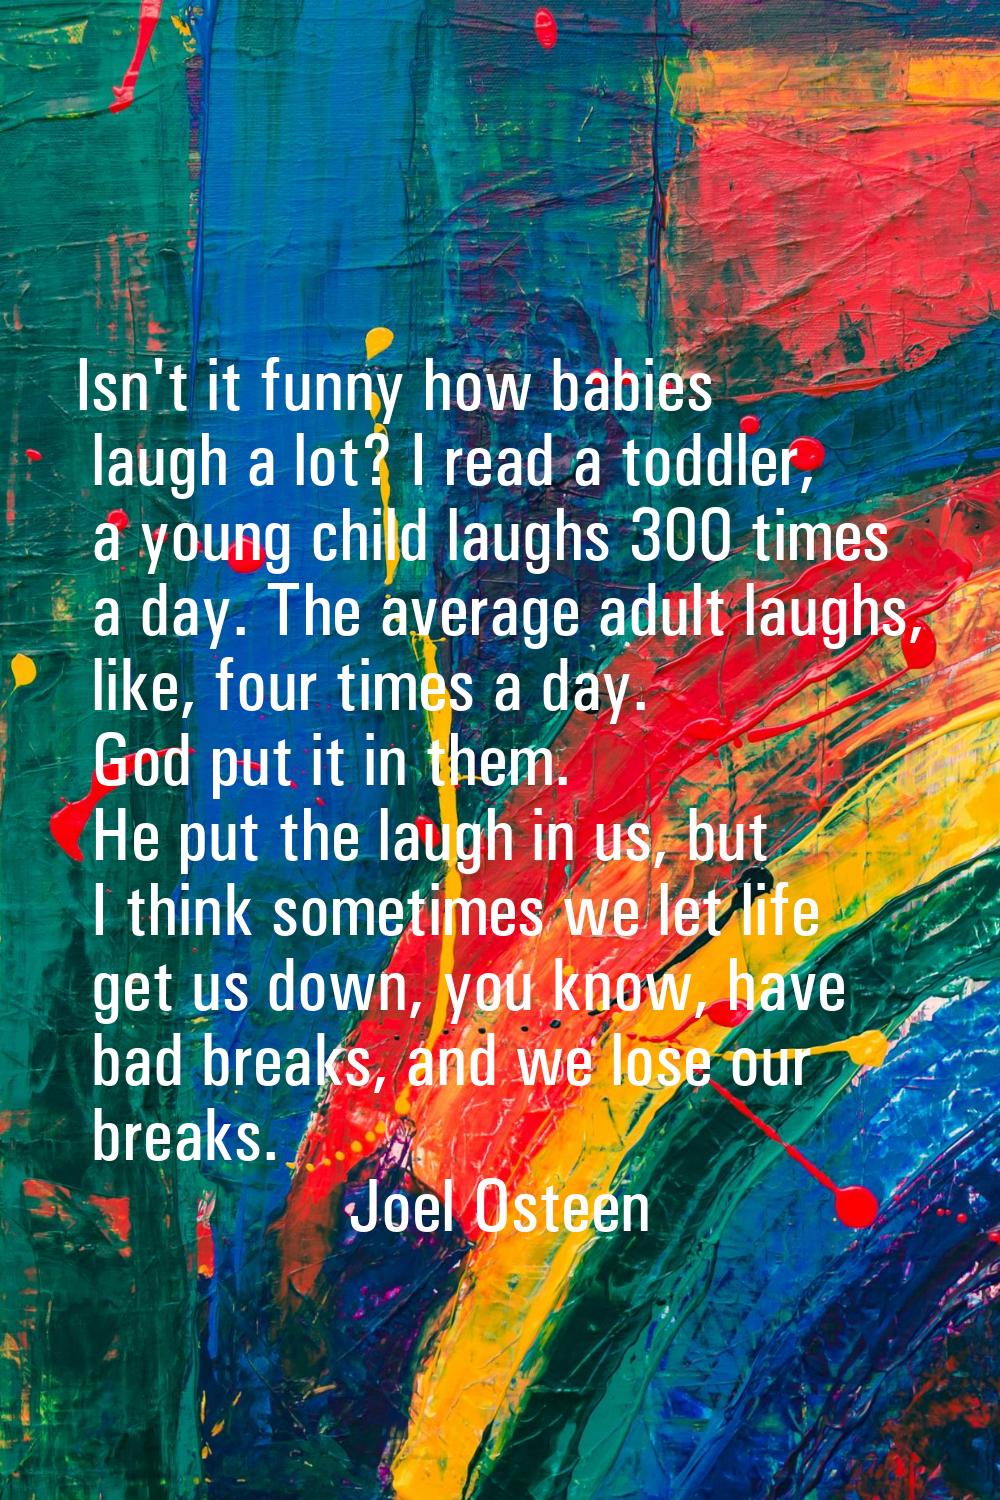 Isn't it funny how babies laugh a lot? I read a toddler, a young child laughs 300 times a day. The 